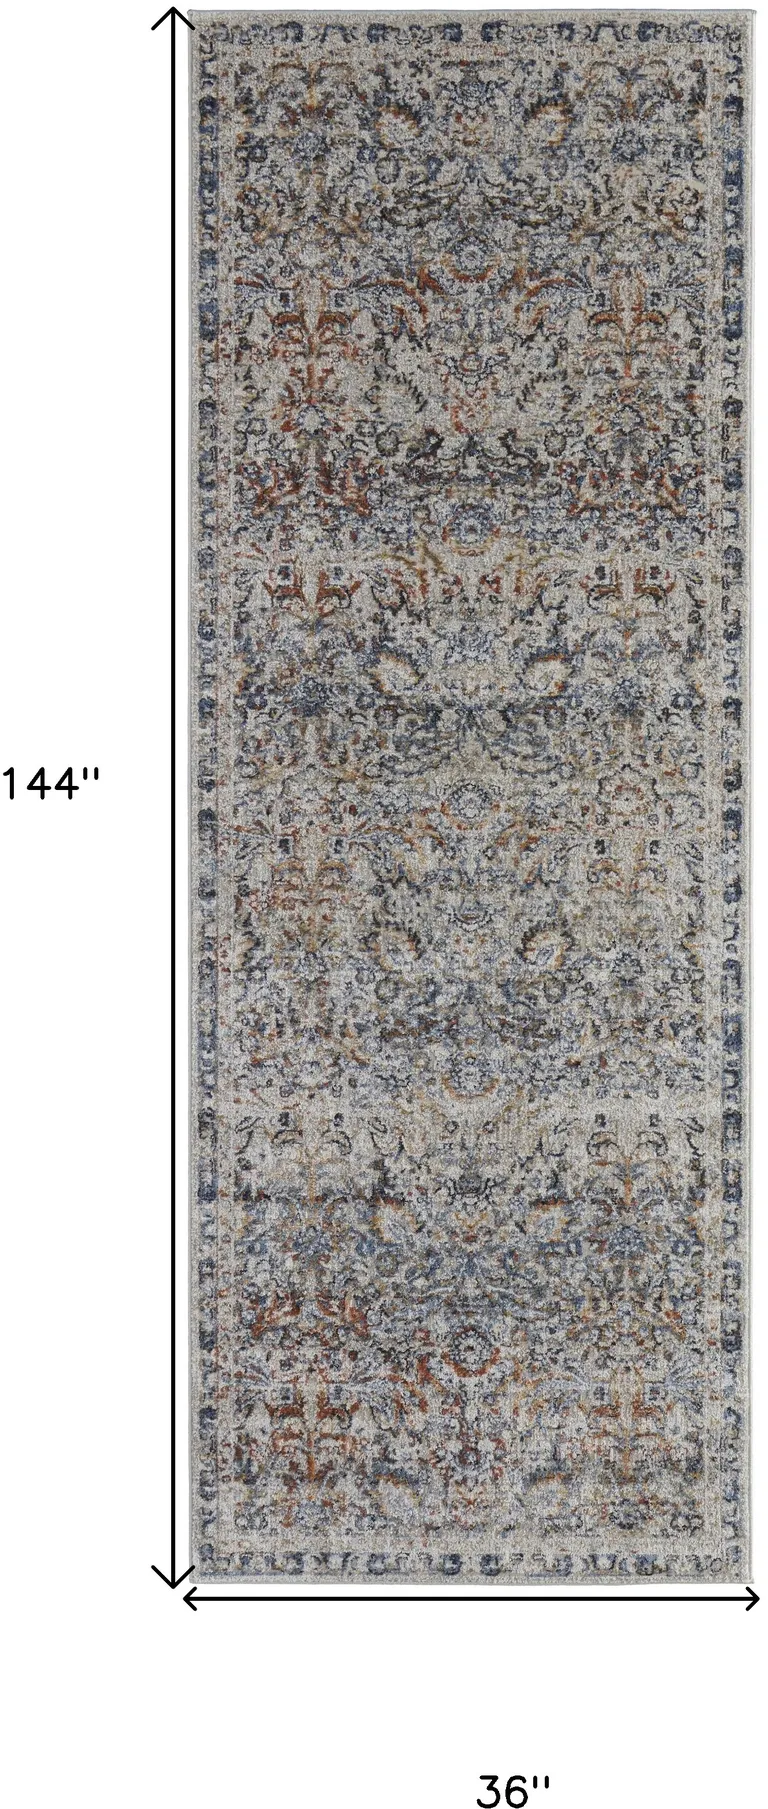 12' Tan Blue And Orange Floral Power Loom Distressed Runner Rug With Fringe Photo 5